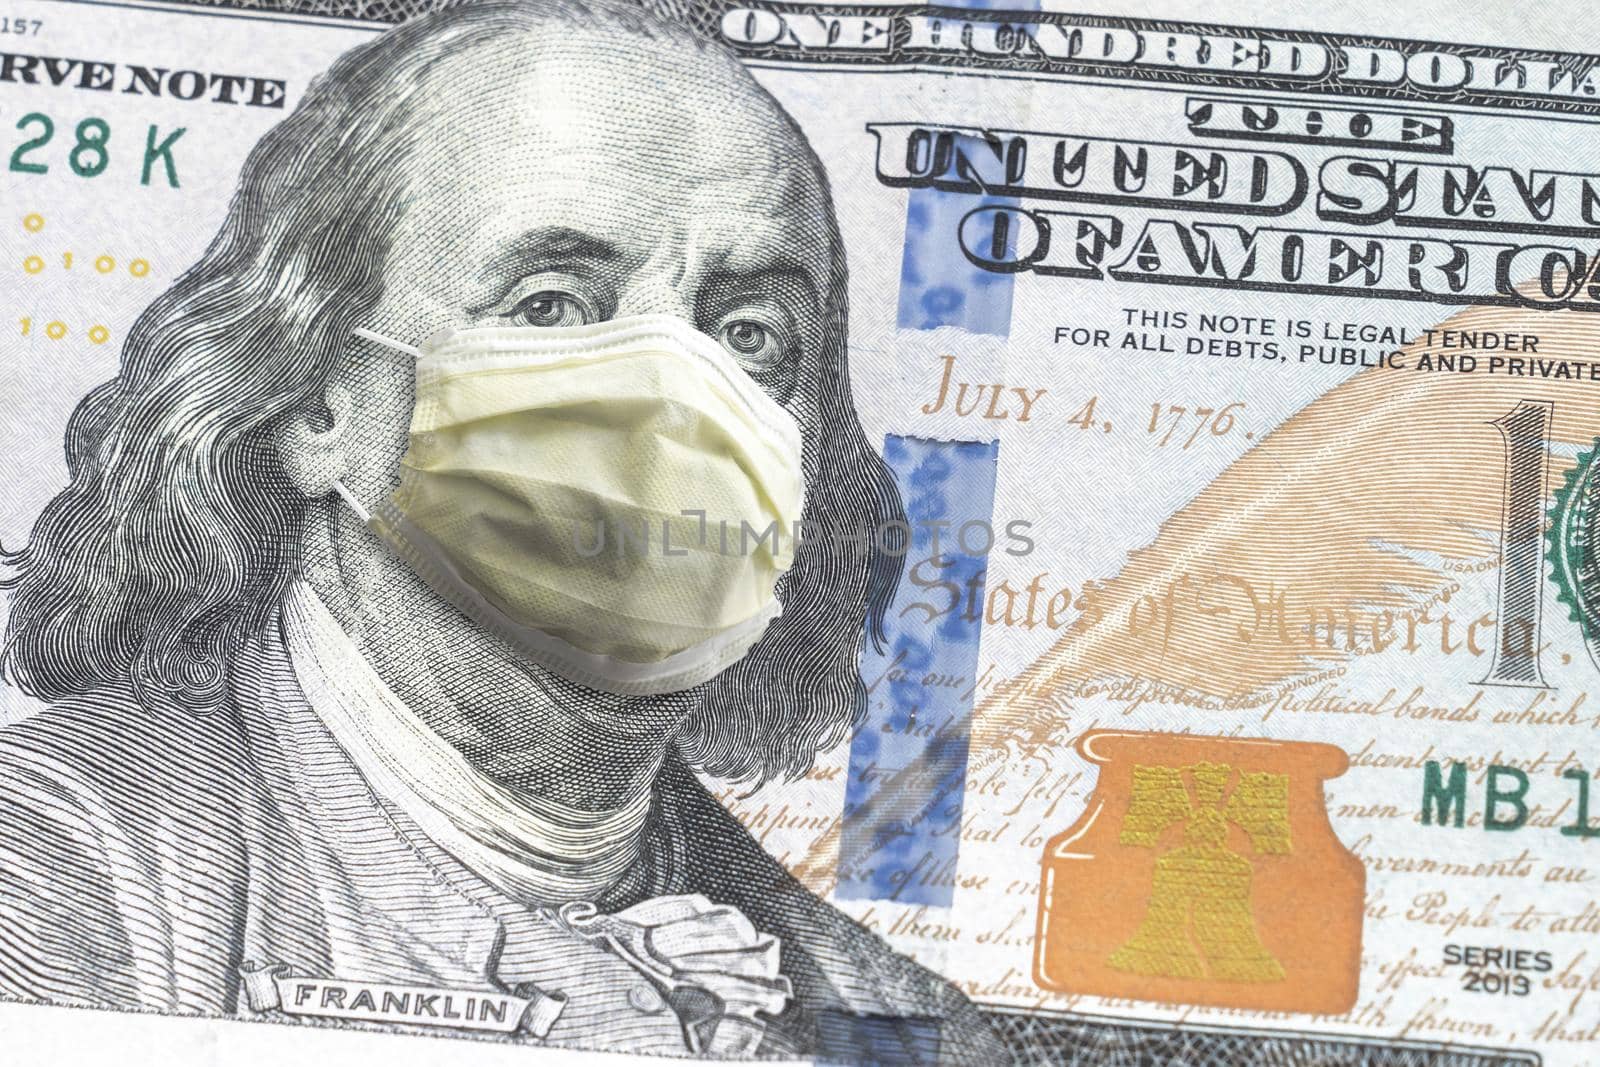 Close up of United States paper currency one hundred dollar bill with Benjamin Franklin wearing yellow doctor mask due to COVID-19 pandemic making a great finance or economic background amidst crisis.